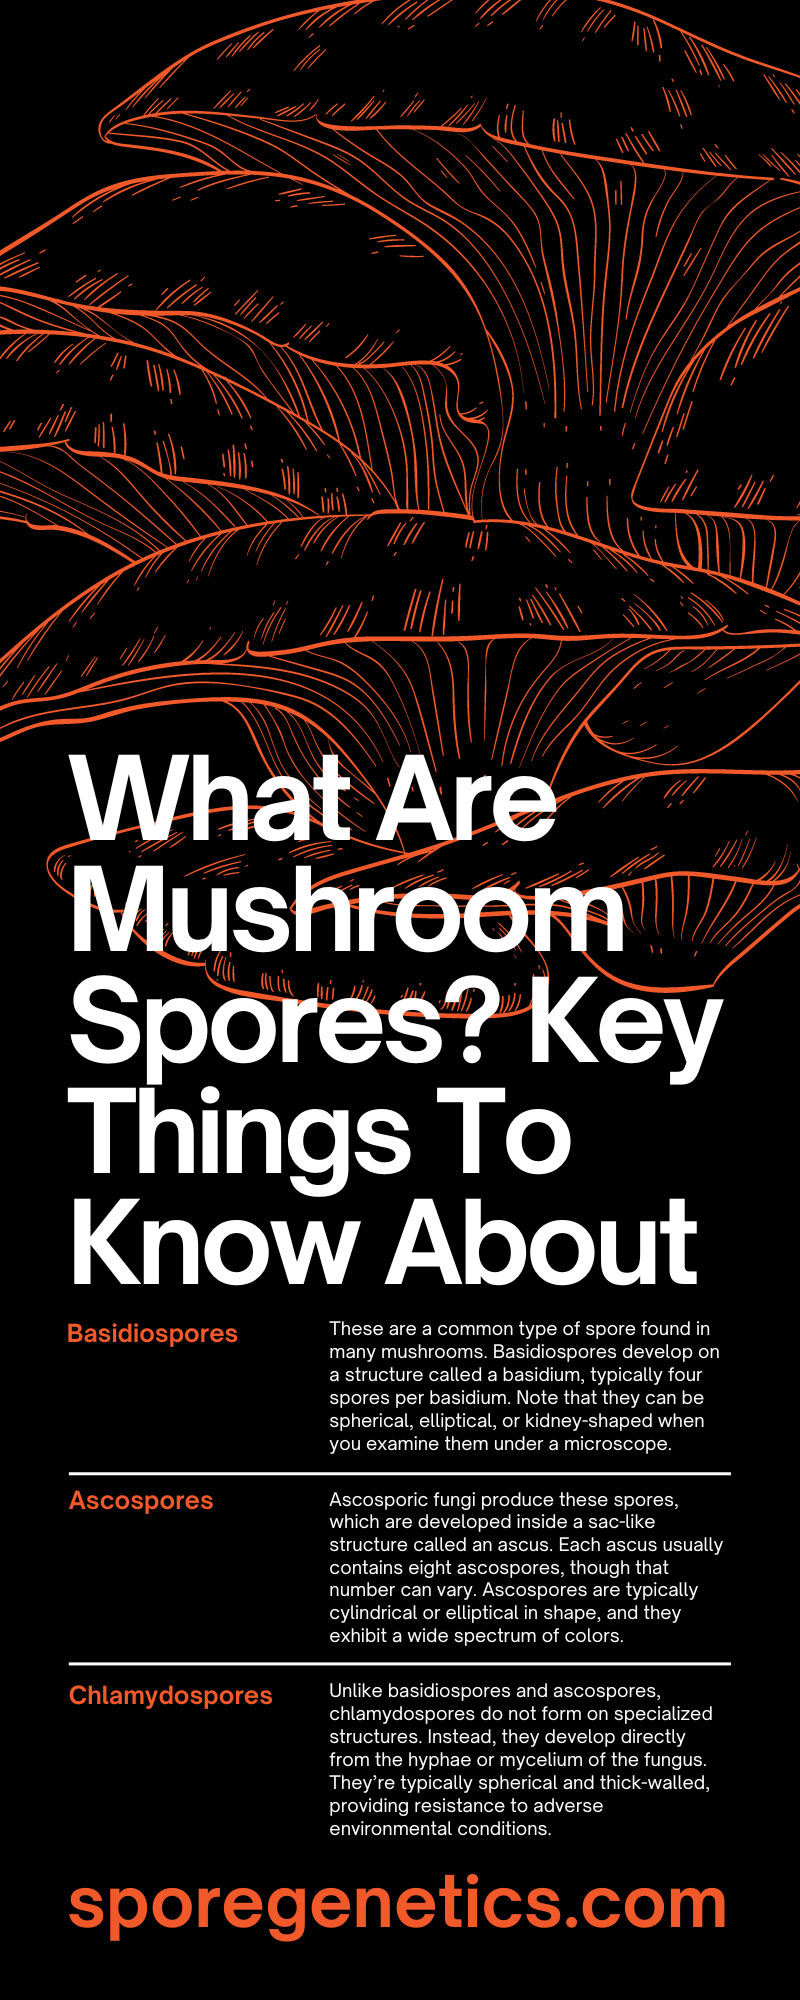 What Are Mushroom Spores? Key Things To Know About